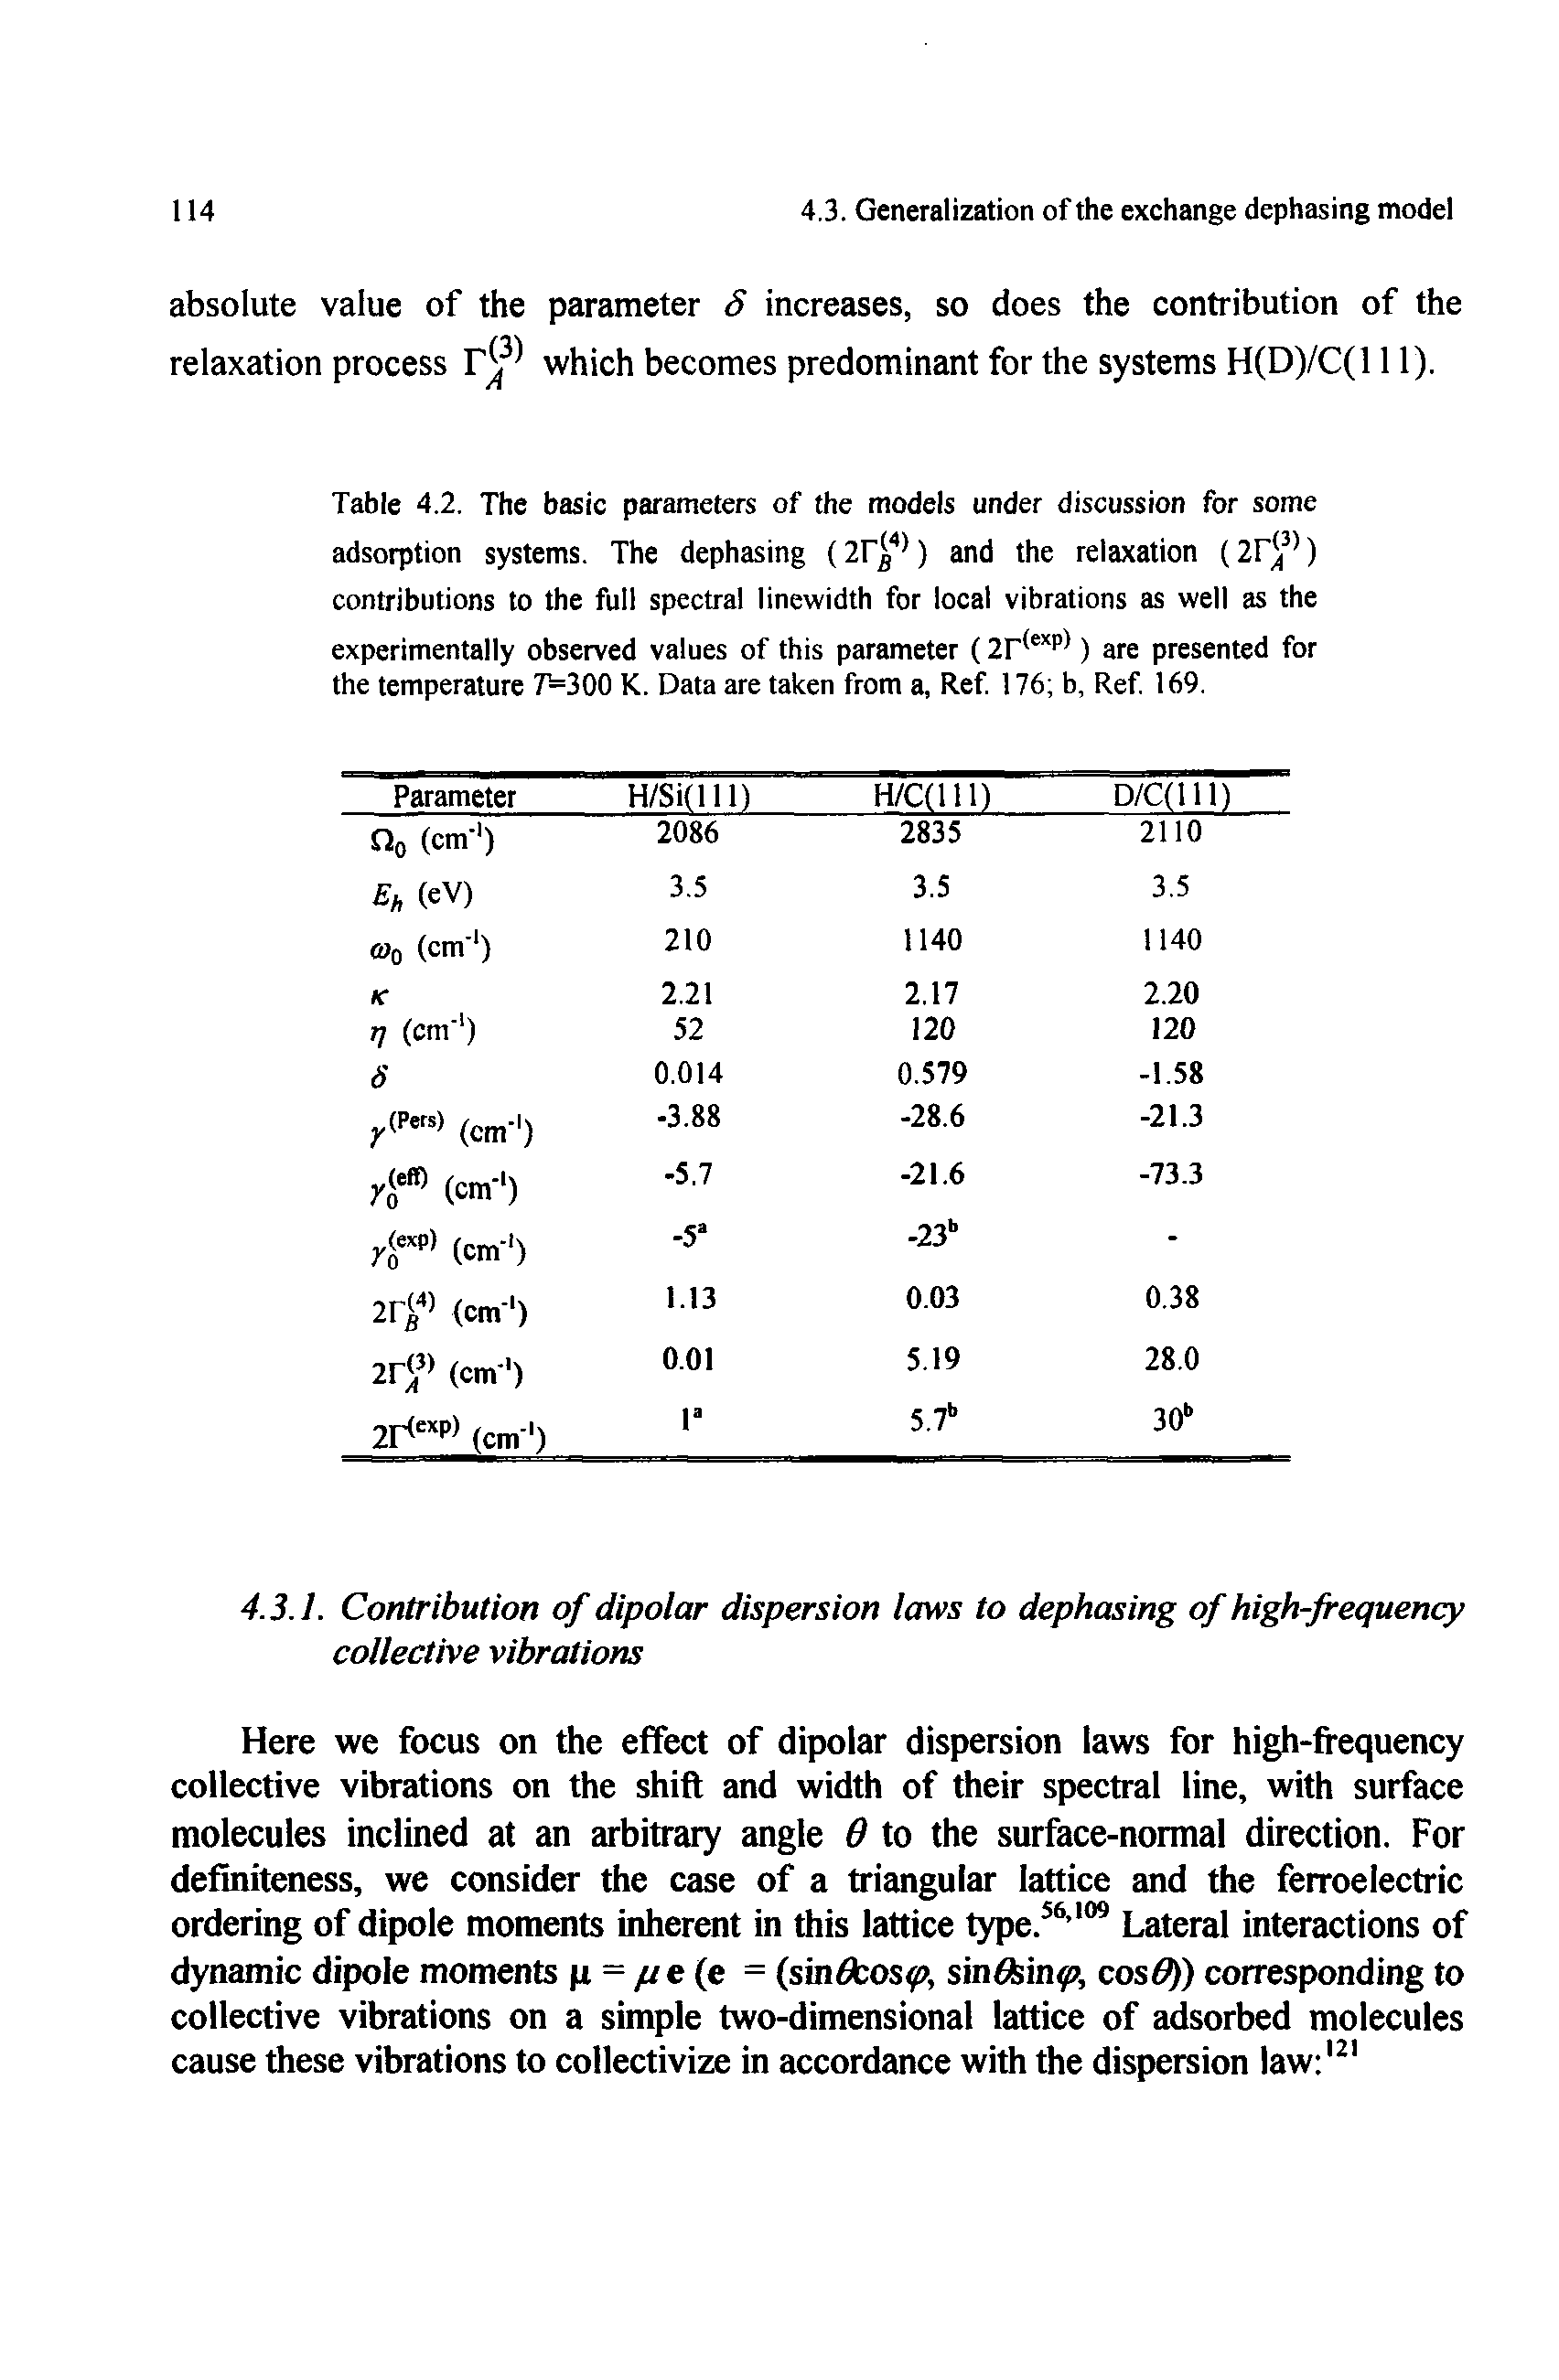 Table 4.2. The basic parameters of the models under discussion for some adsorption systems. The dephasing (2f 4)) and the relaxation (2T 3)) contributions to the full spectral linewidth for local vibrations as well as the...